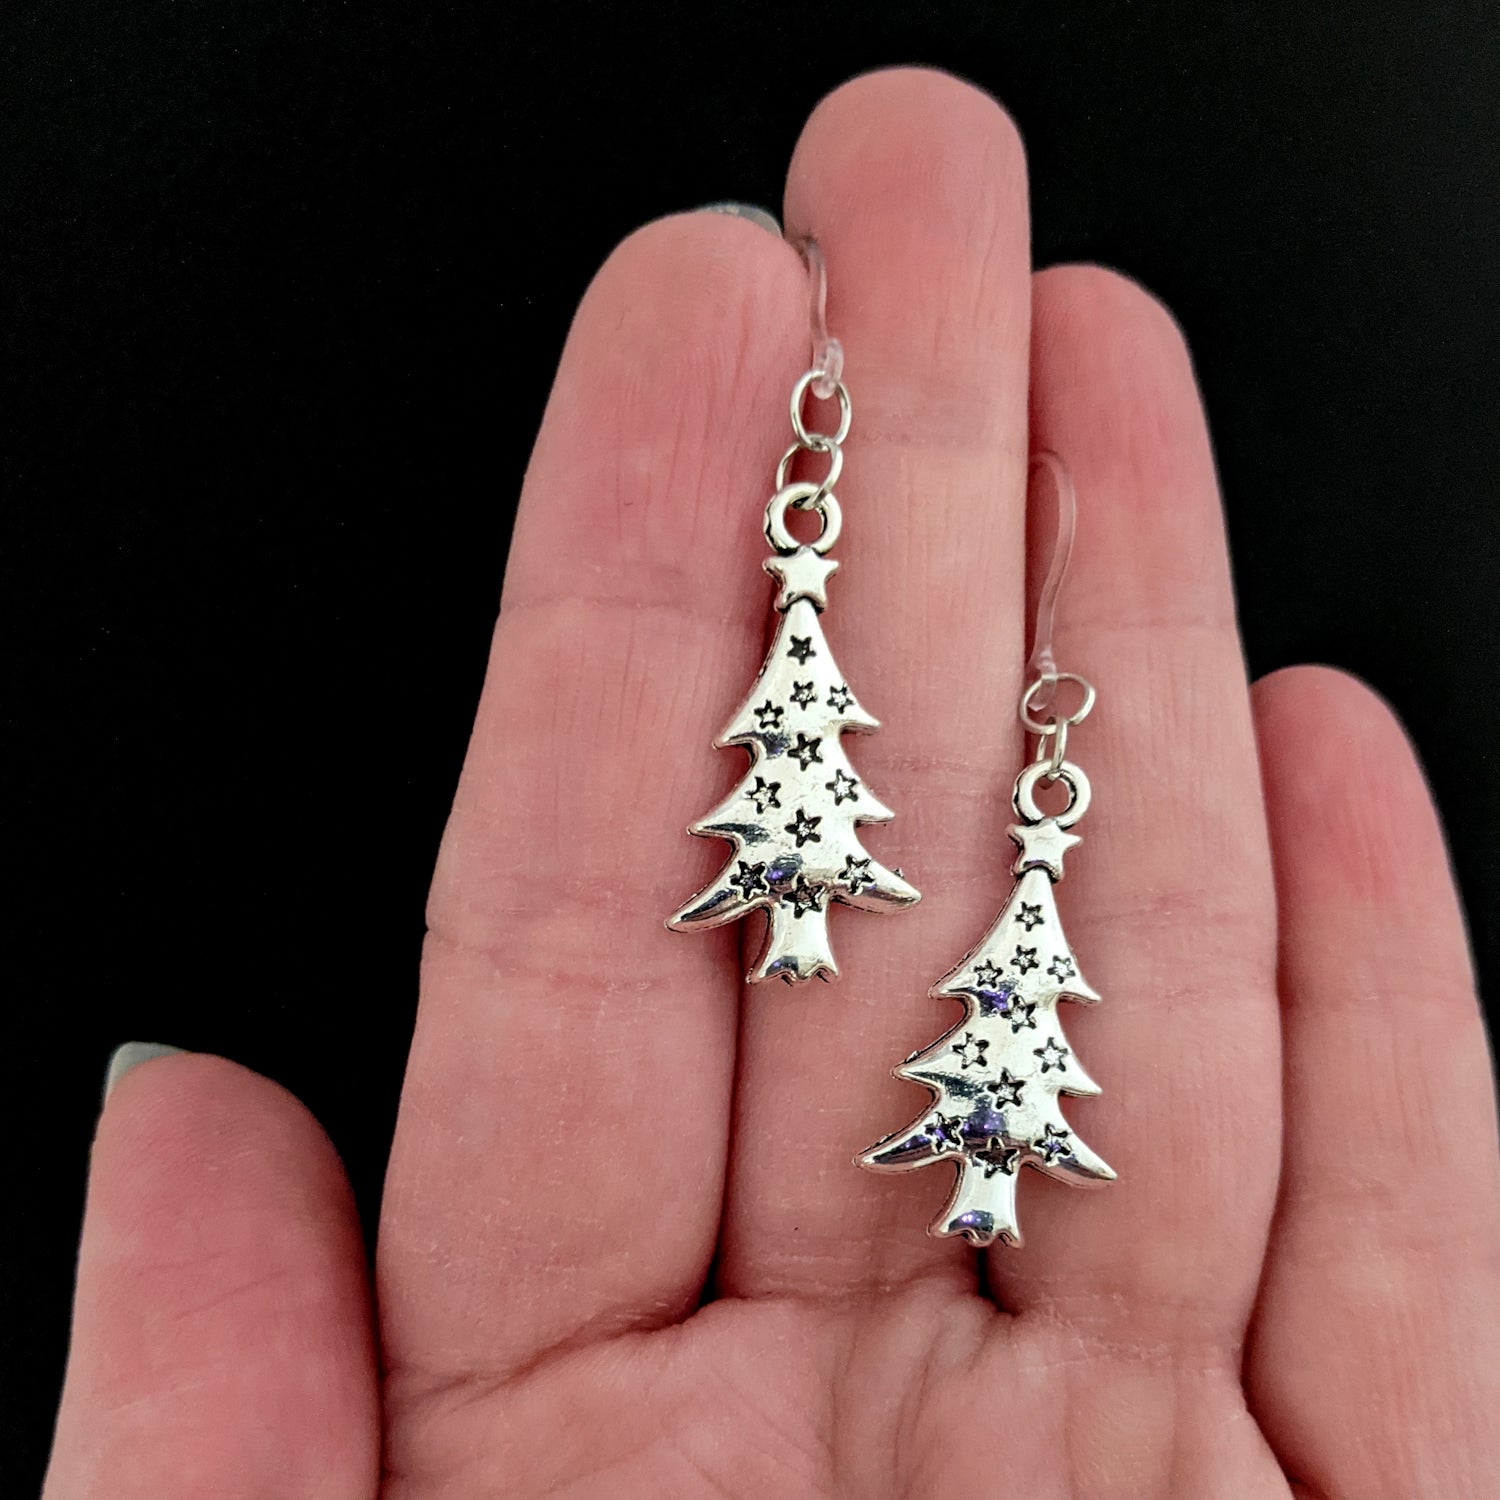 Silver Christmas Tree Earrings (Dangles) - size comparison hand